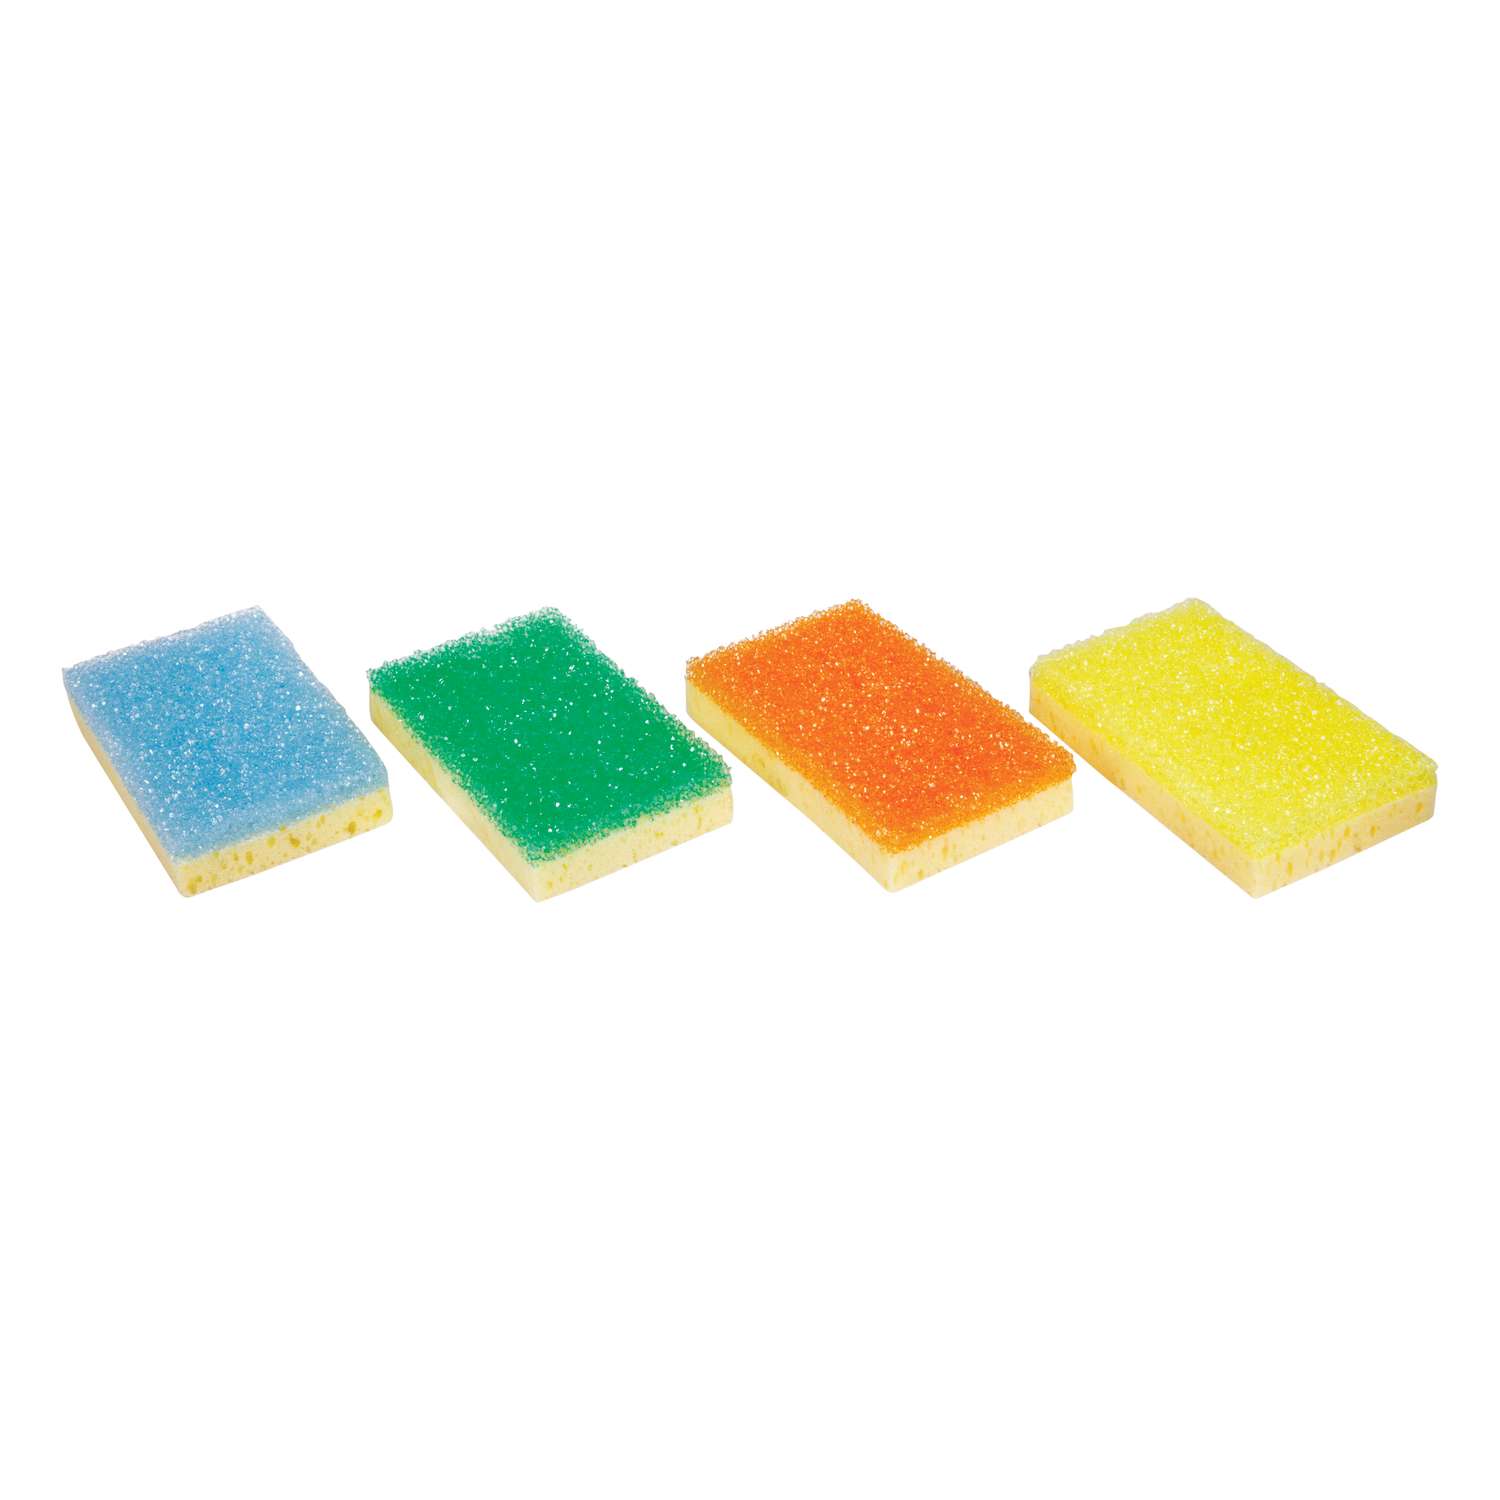 Scrub Daddy Damp Duster Sponges, Sheets, Towels 8-Piece Set